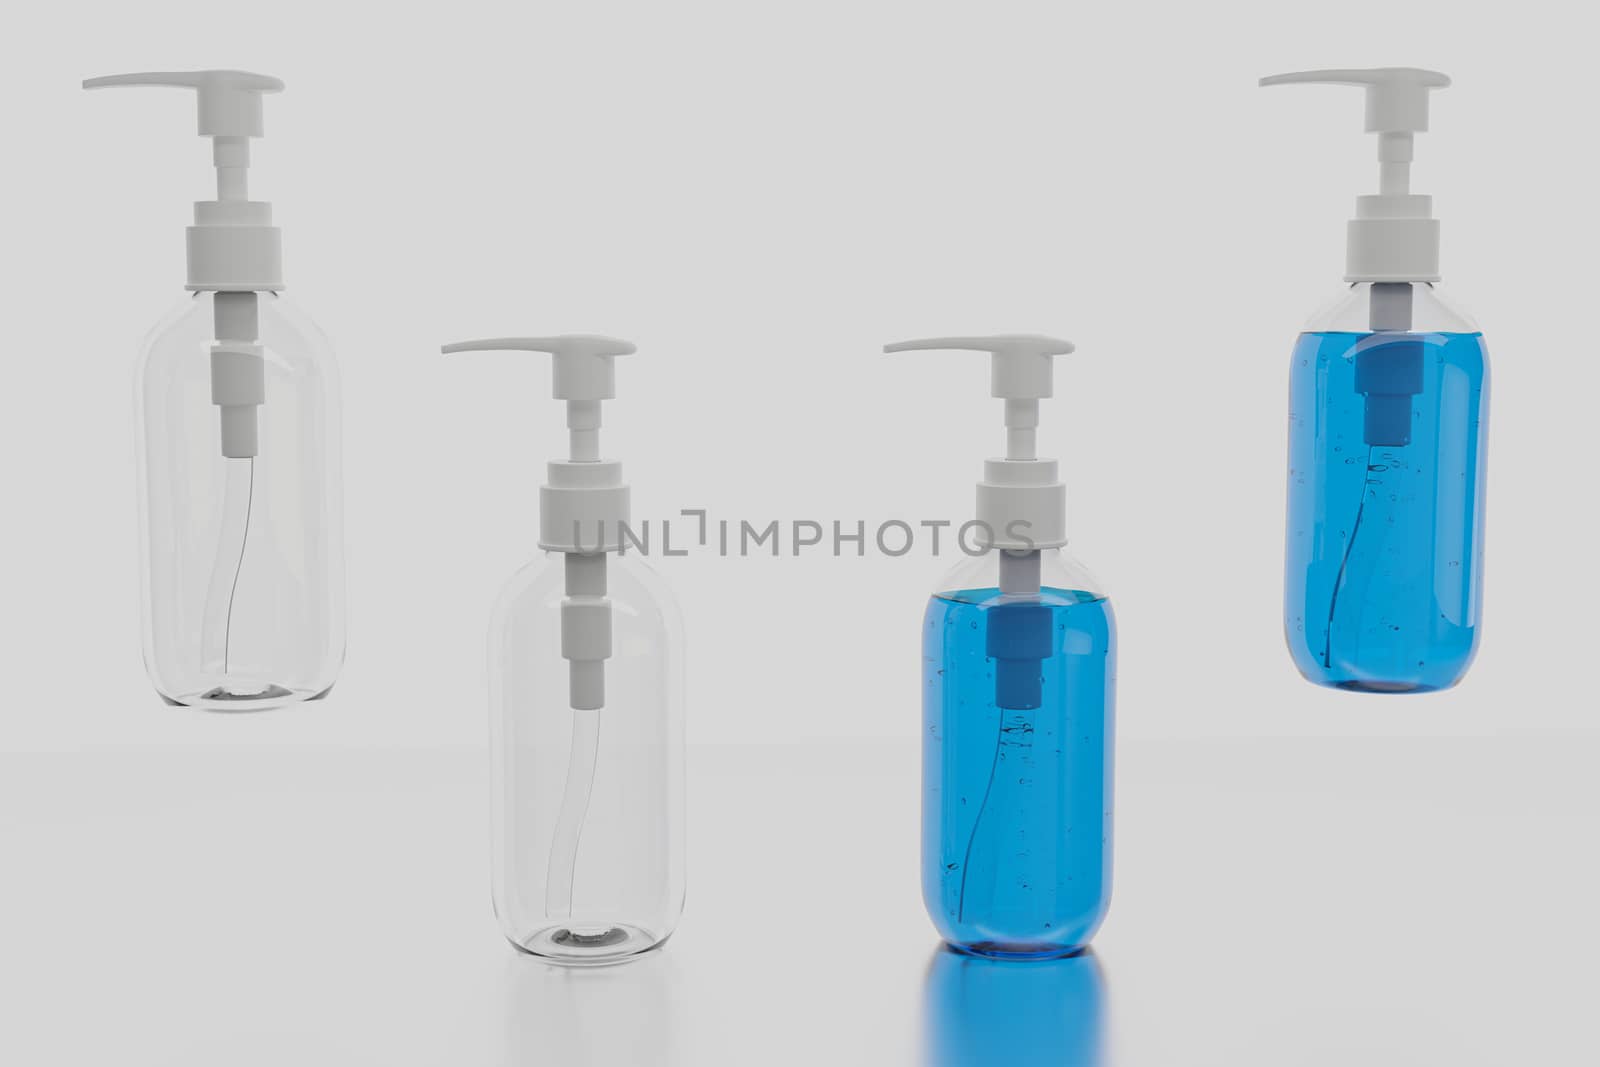 Alcohol gel sanitizer hand gel cleaners for anti Bacteria and virus on White Background with reflection and with out reflection , People using alcohol gel to wash hands to prevent COVID-19 virus. 3D Rendering.